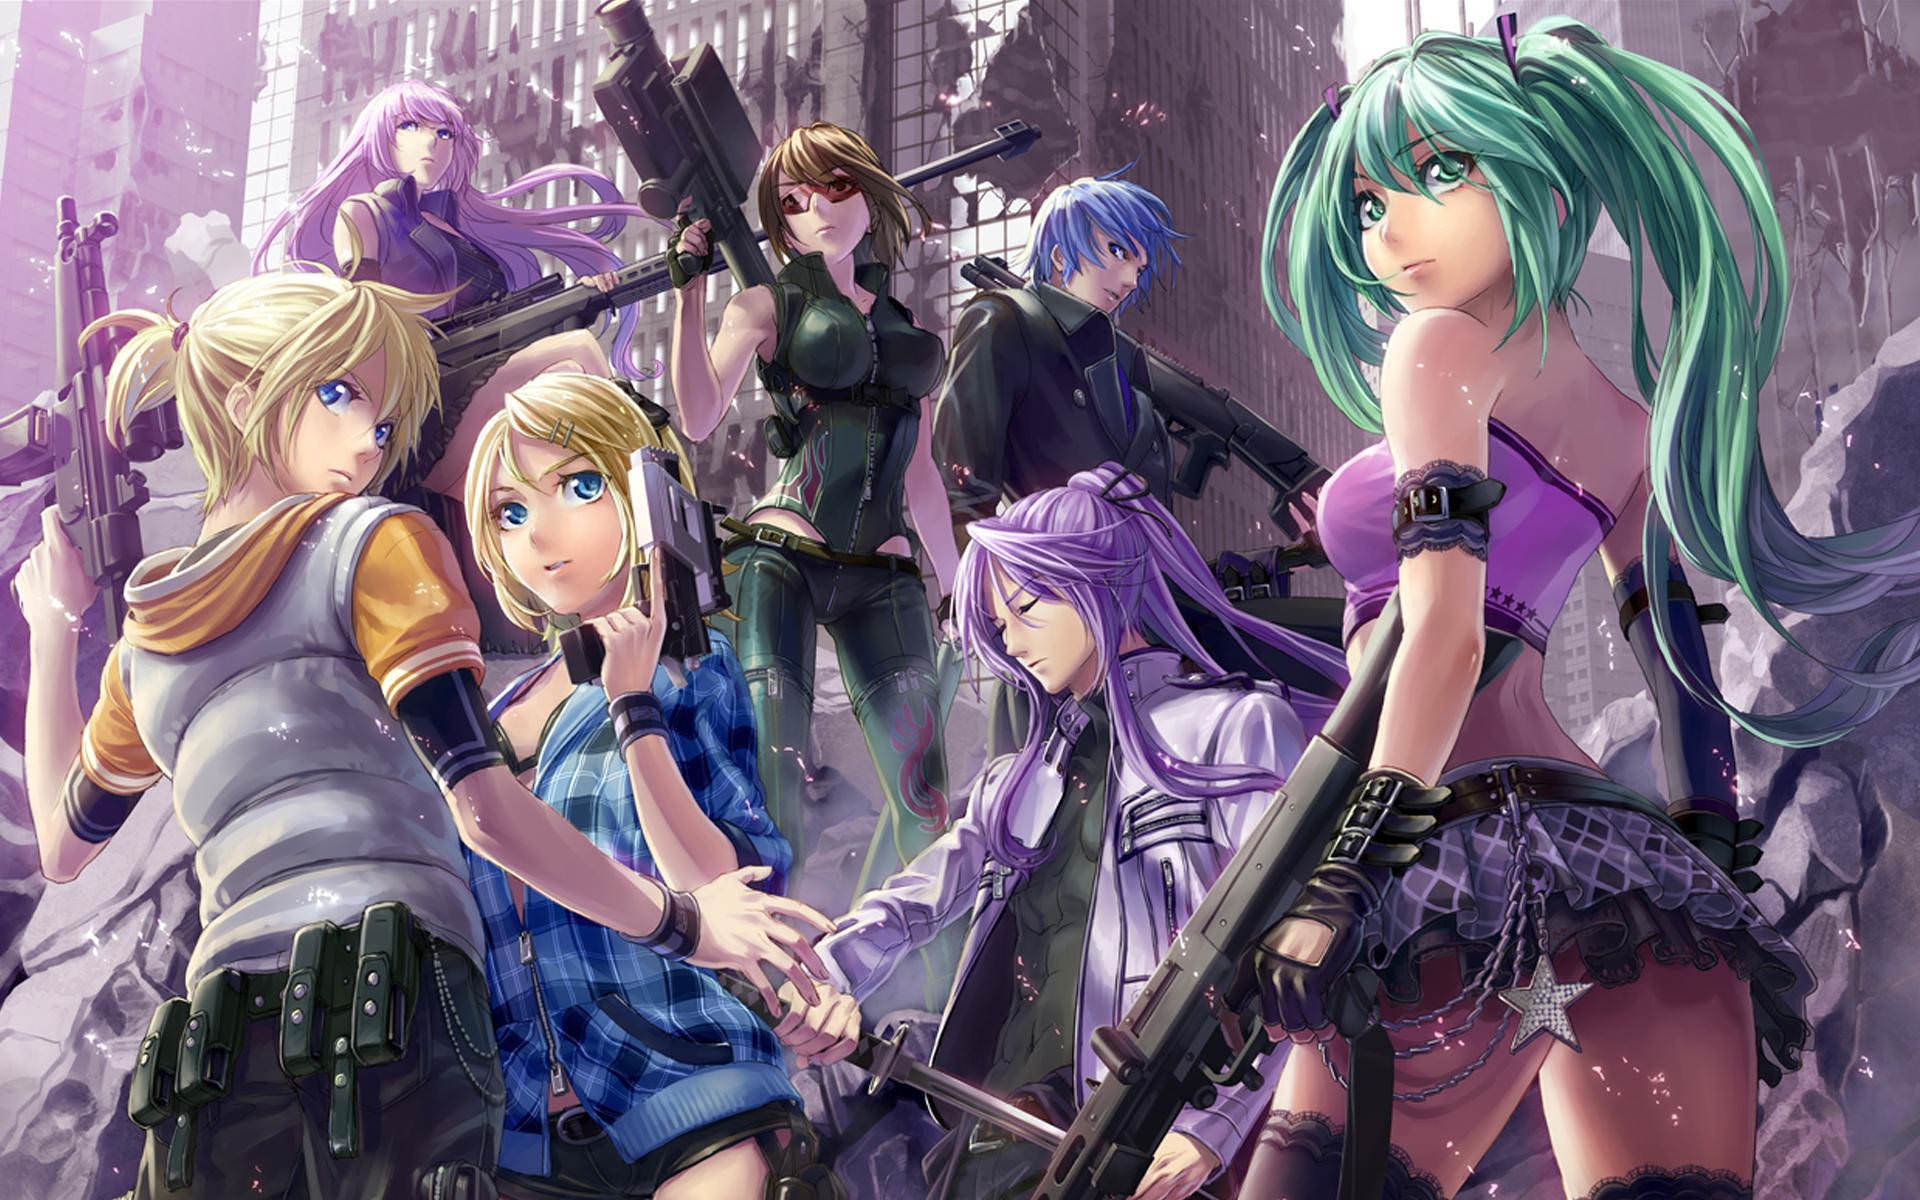 1920x1200 Vocaloid Wallpaper For Free